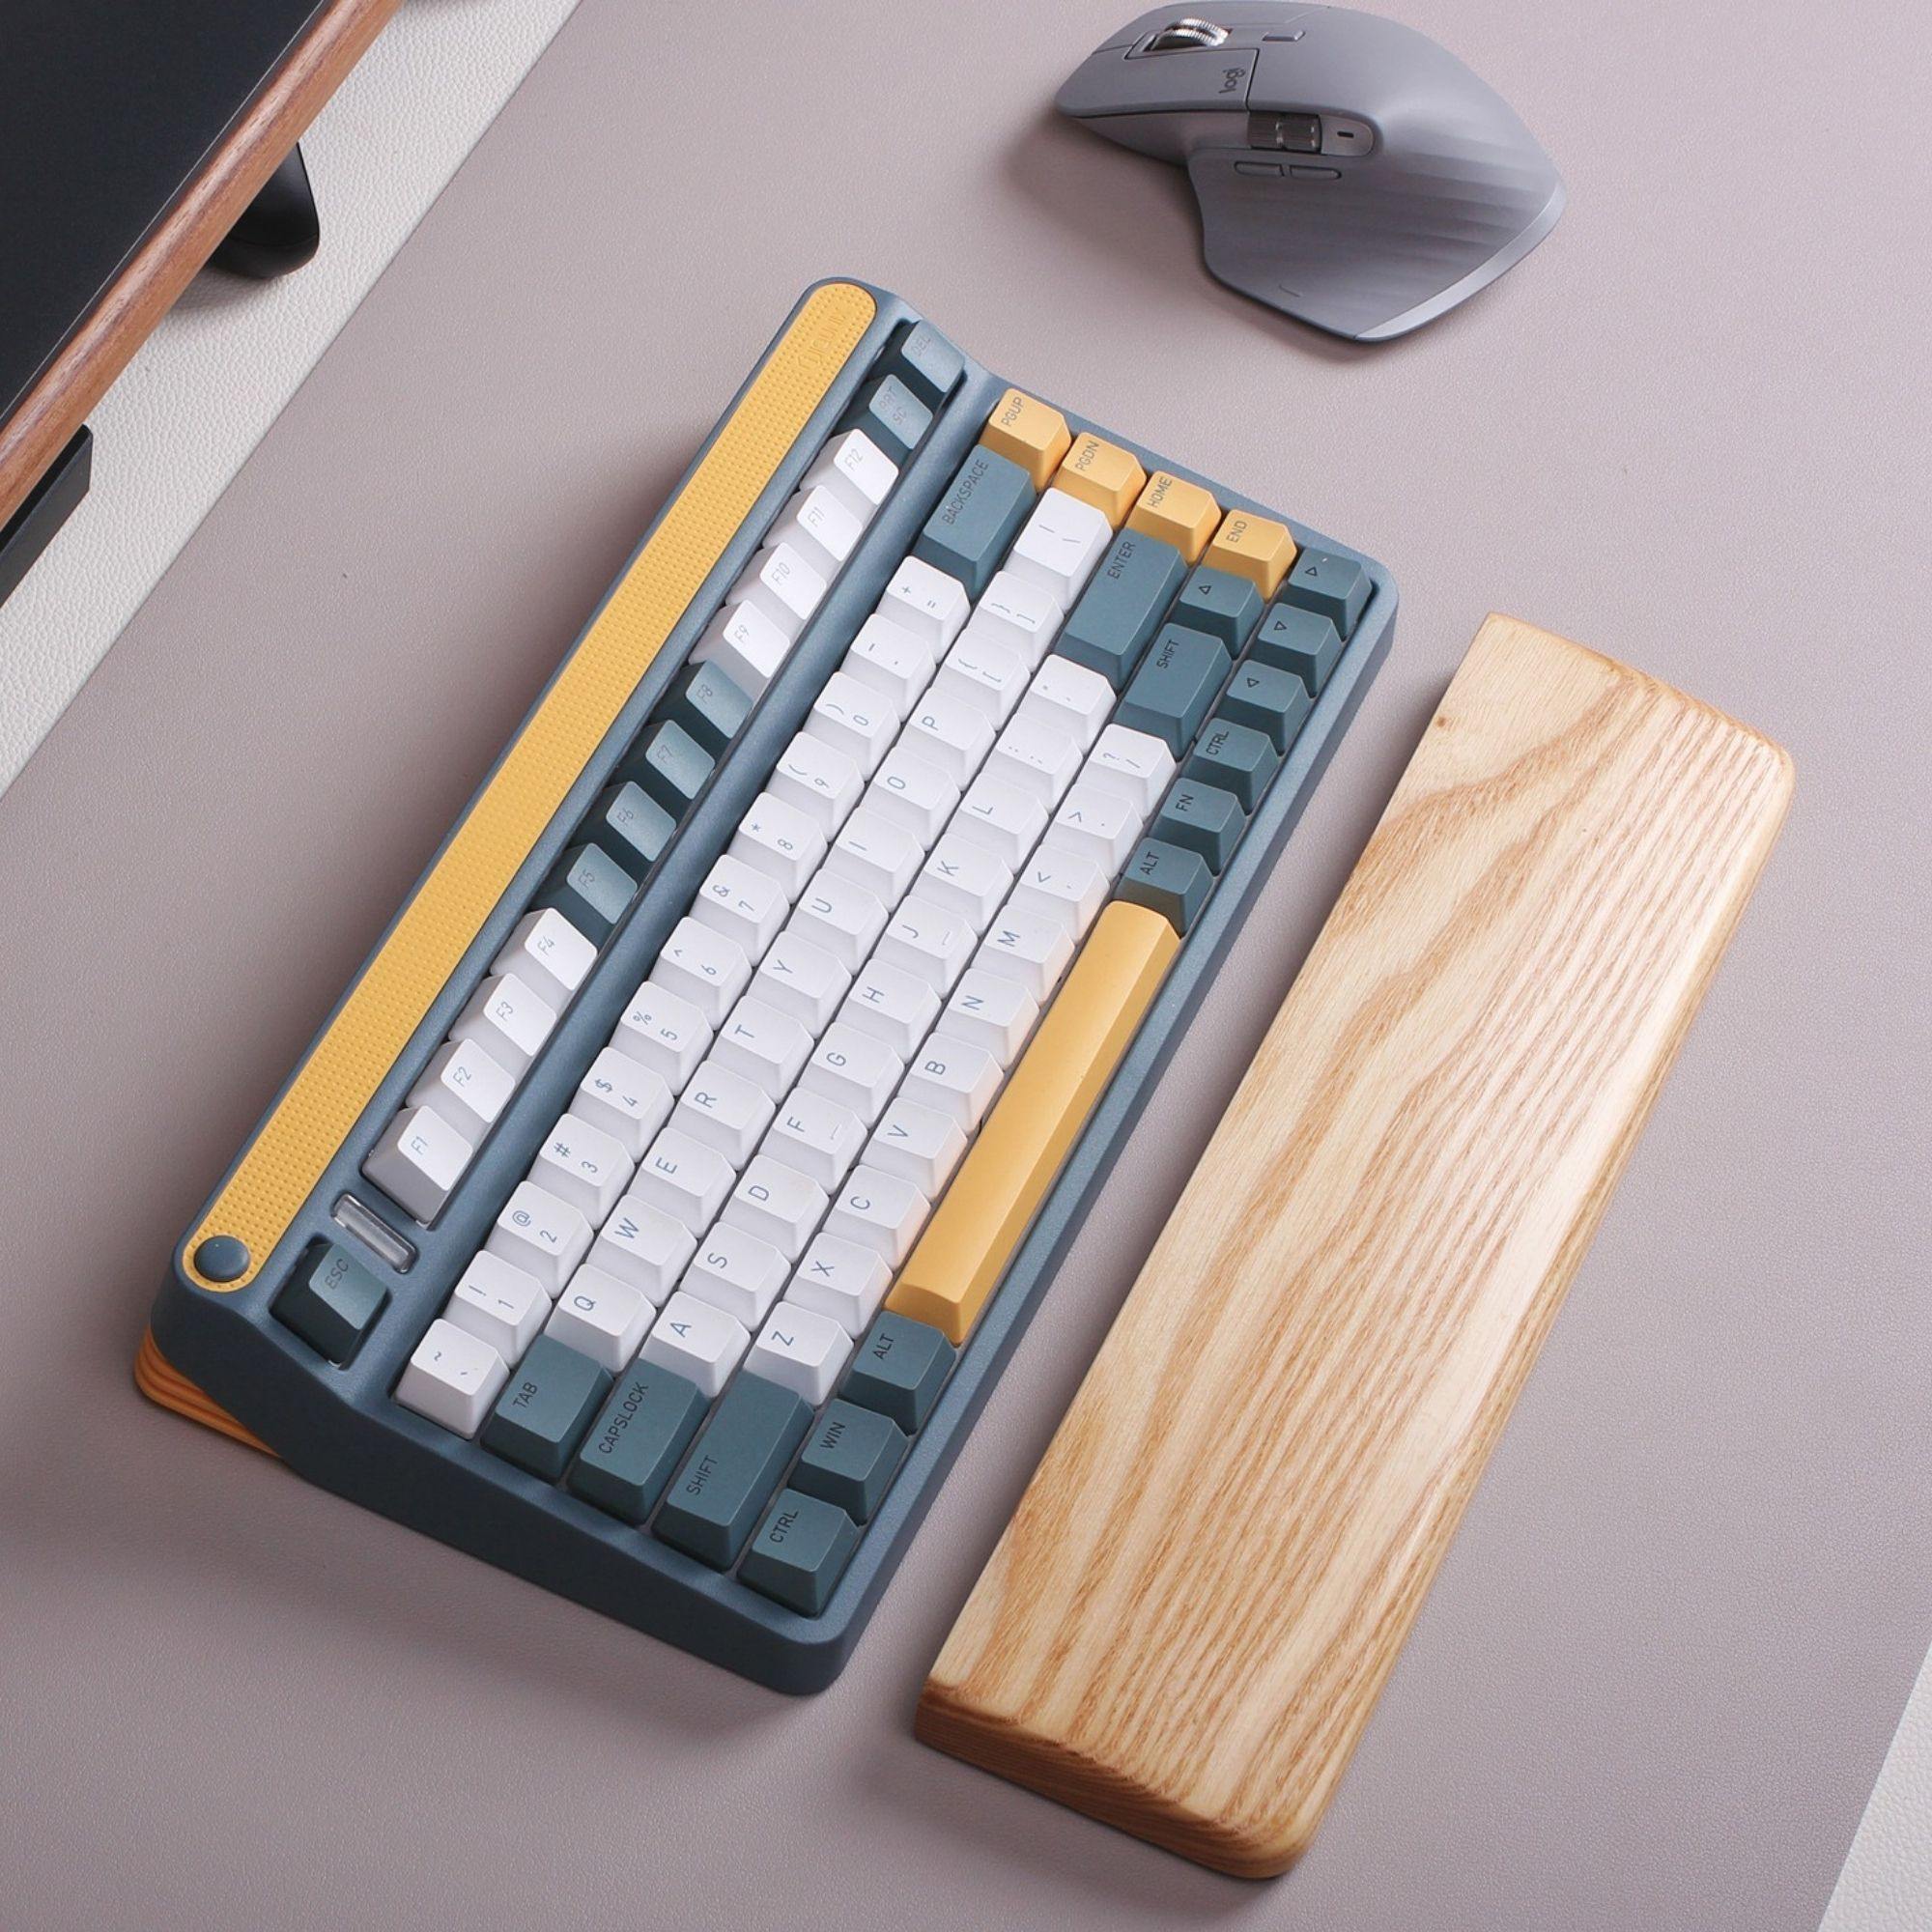 wooden keyboard wrist rests are crafted from White Ash wood